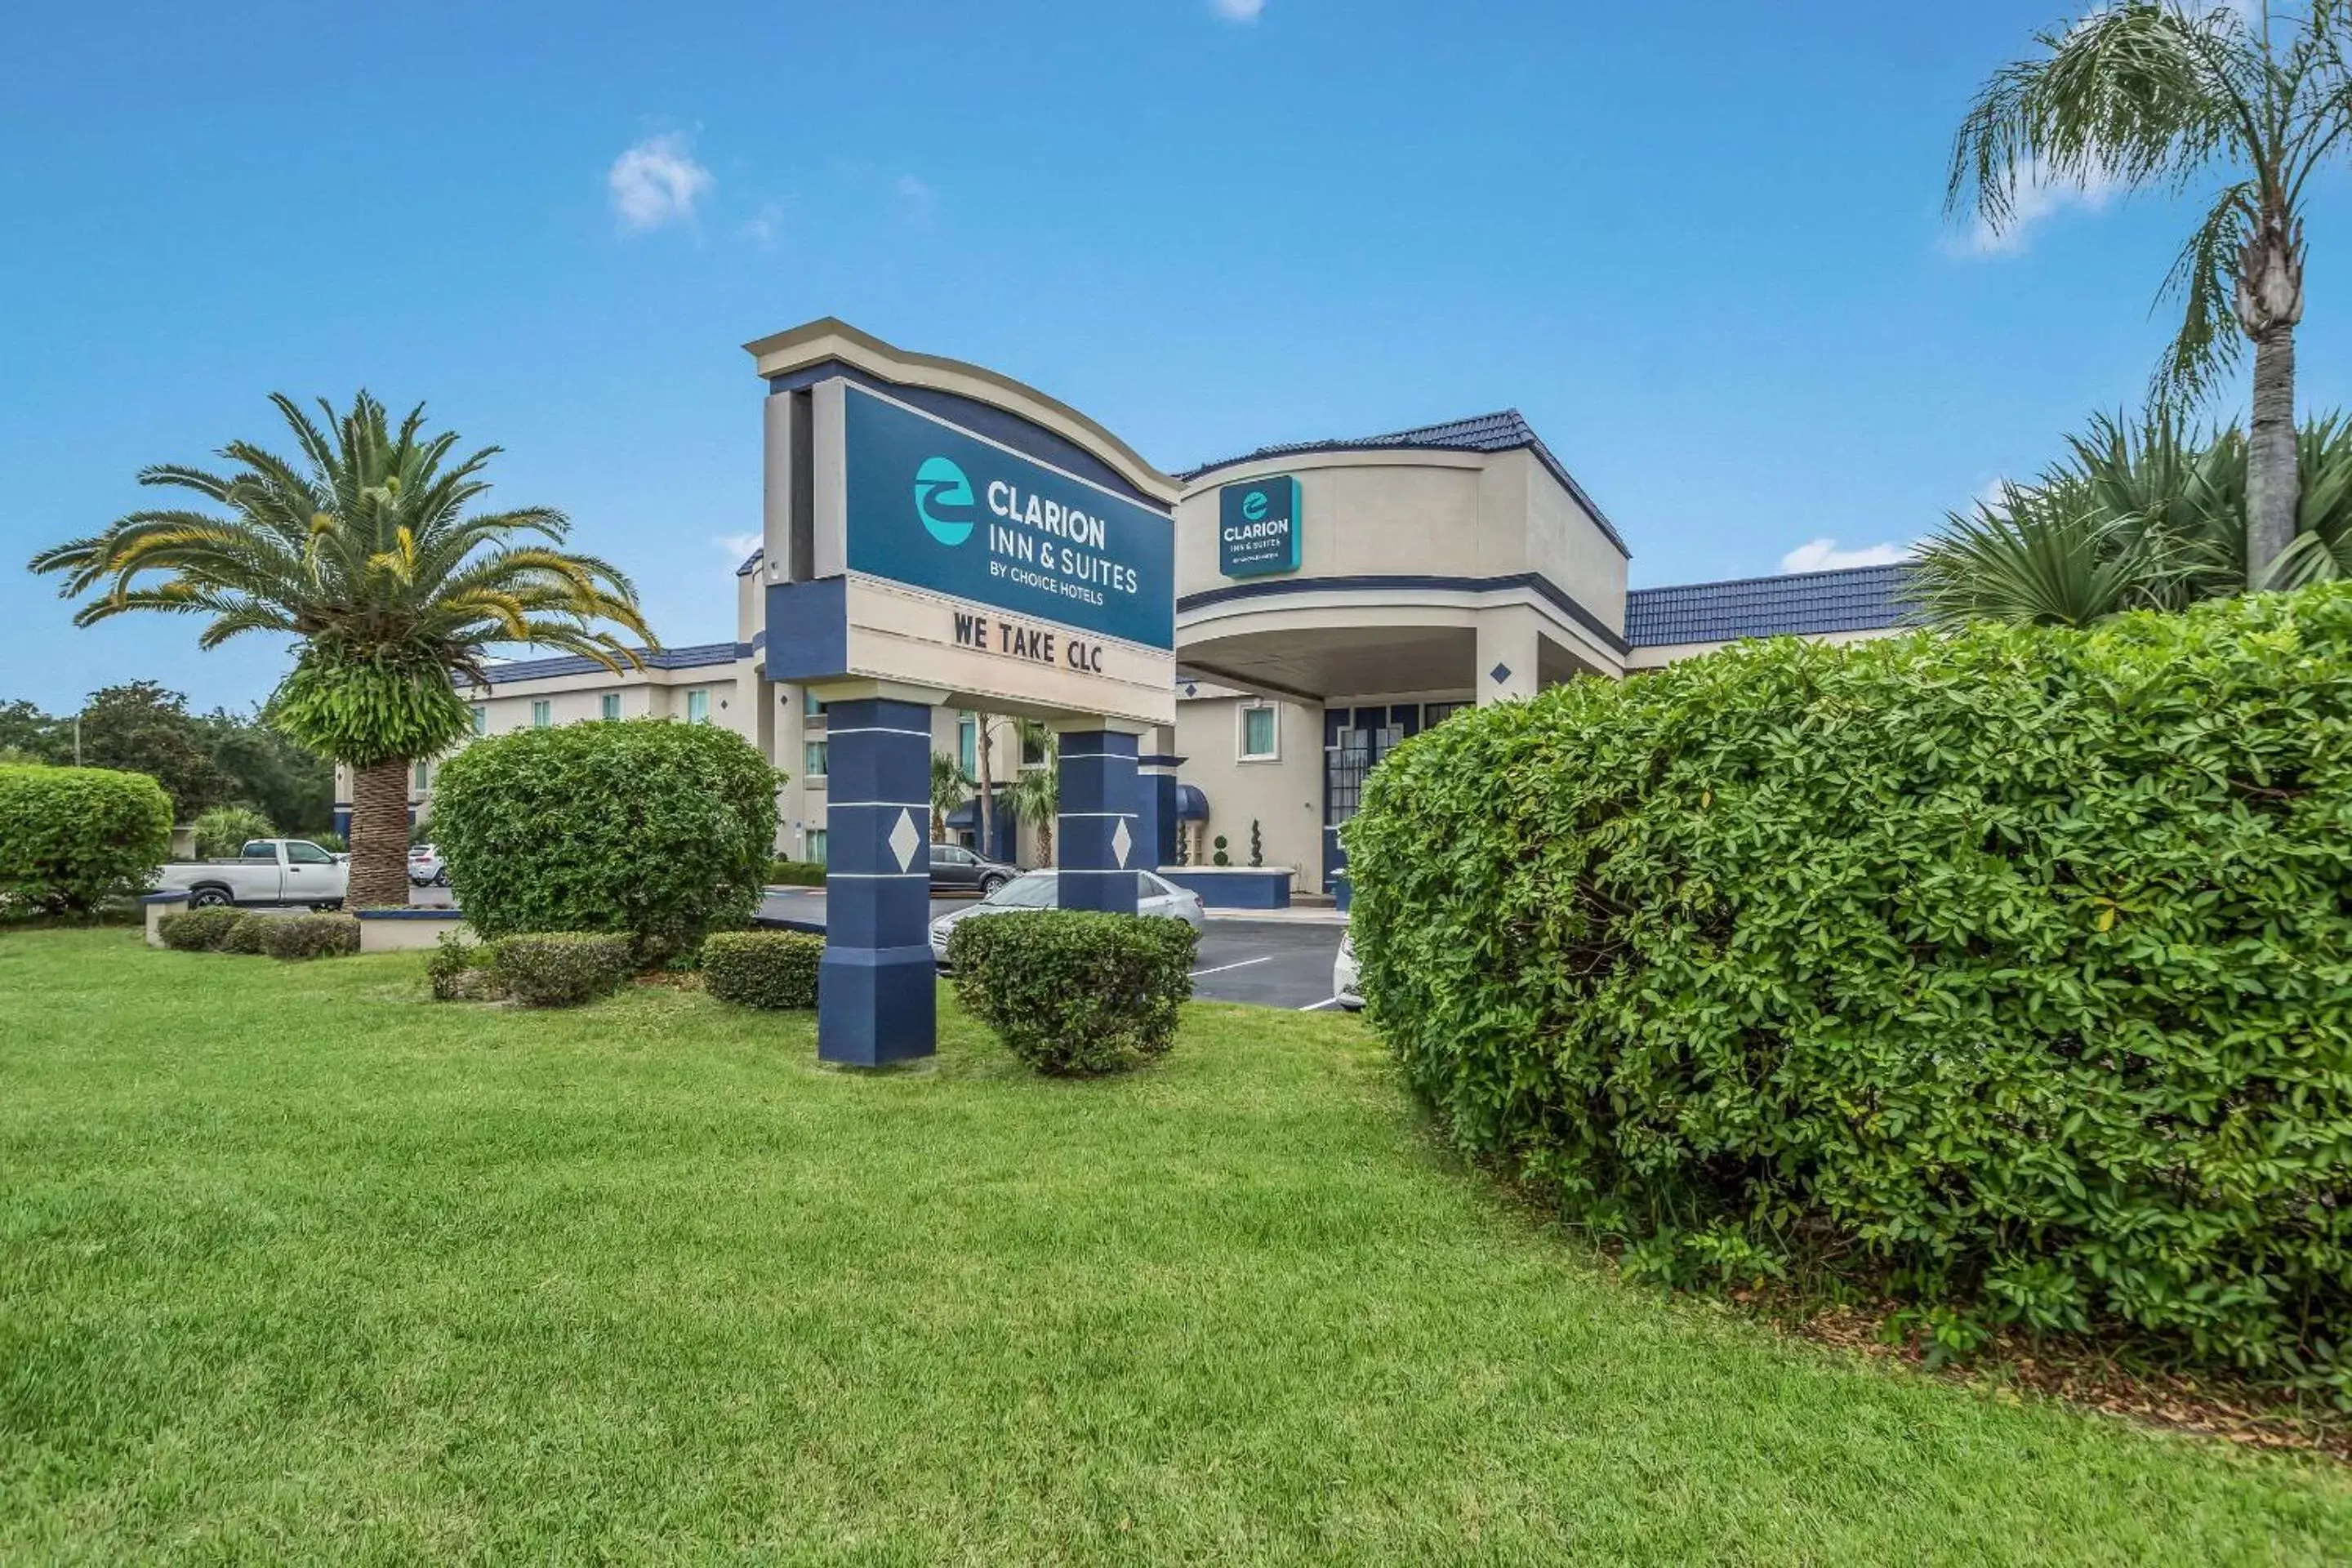 Property Building in Clarion Inn & Suites Central Clearwater Beach